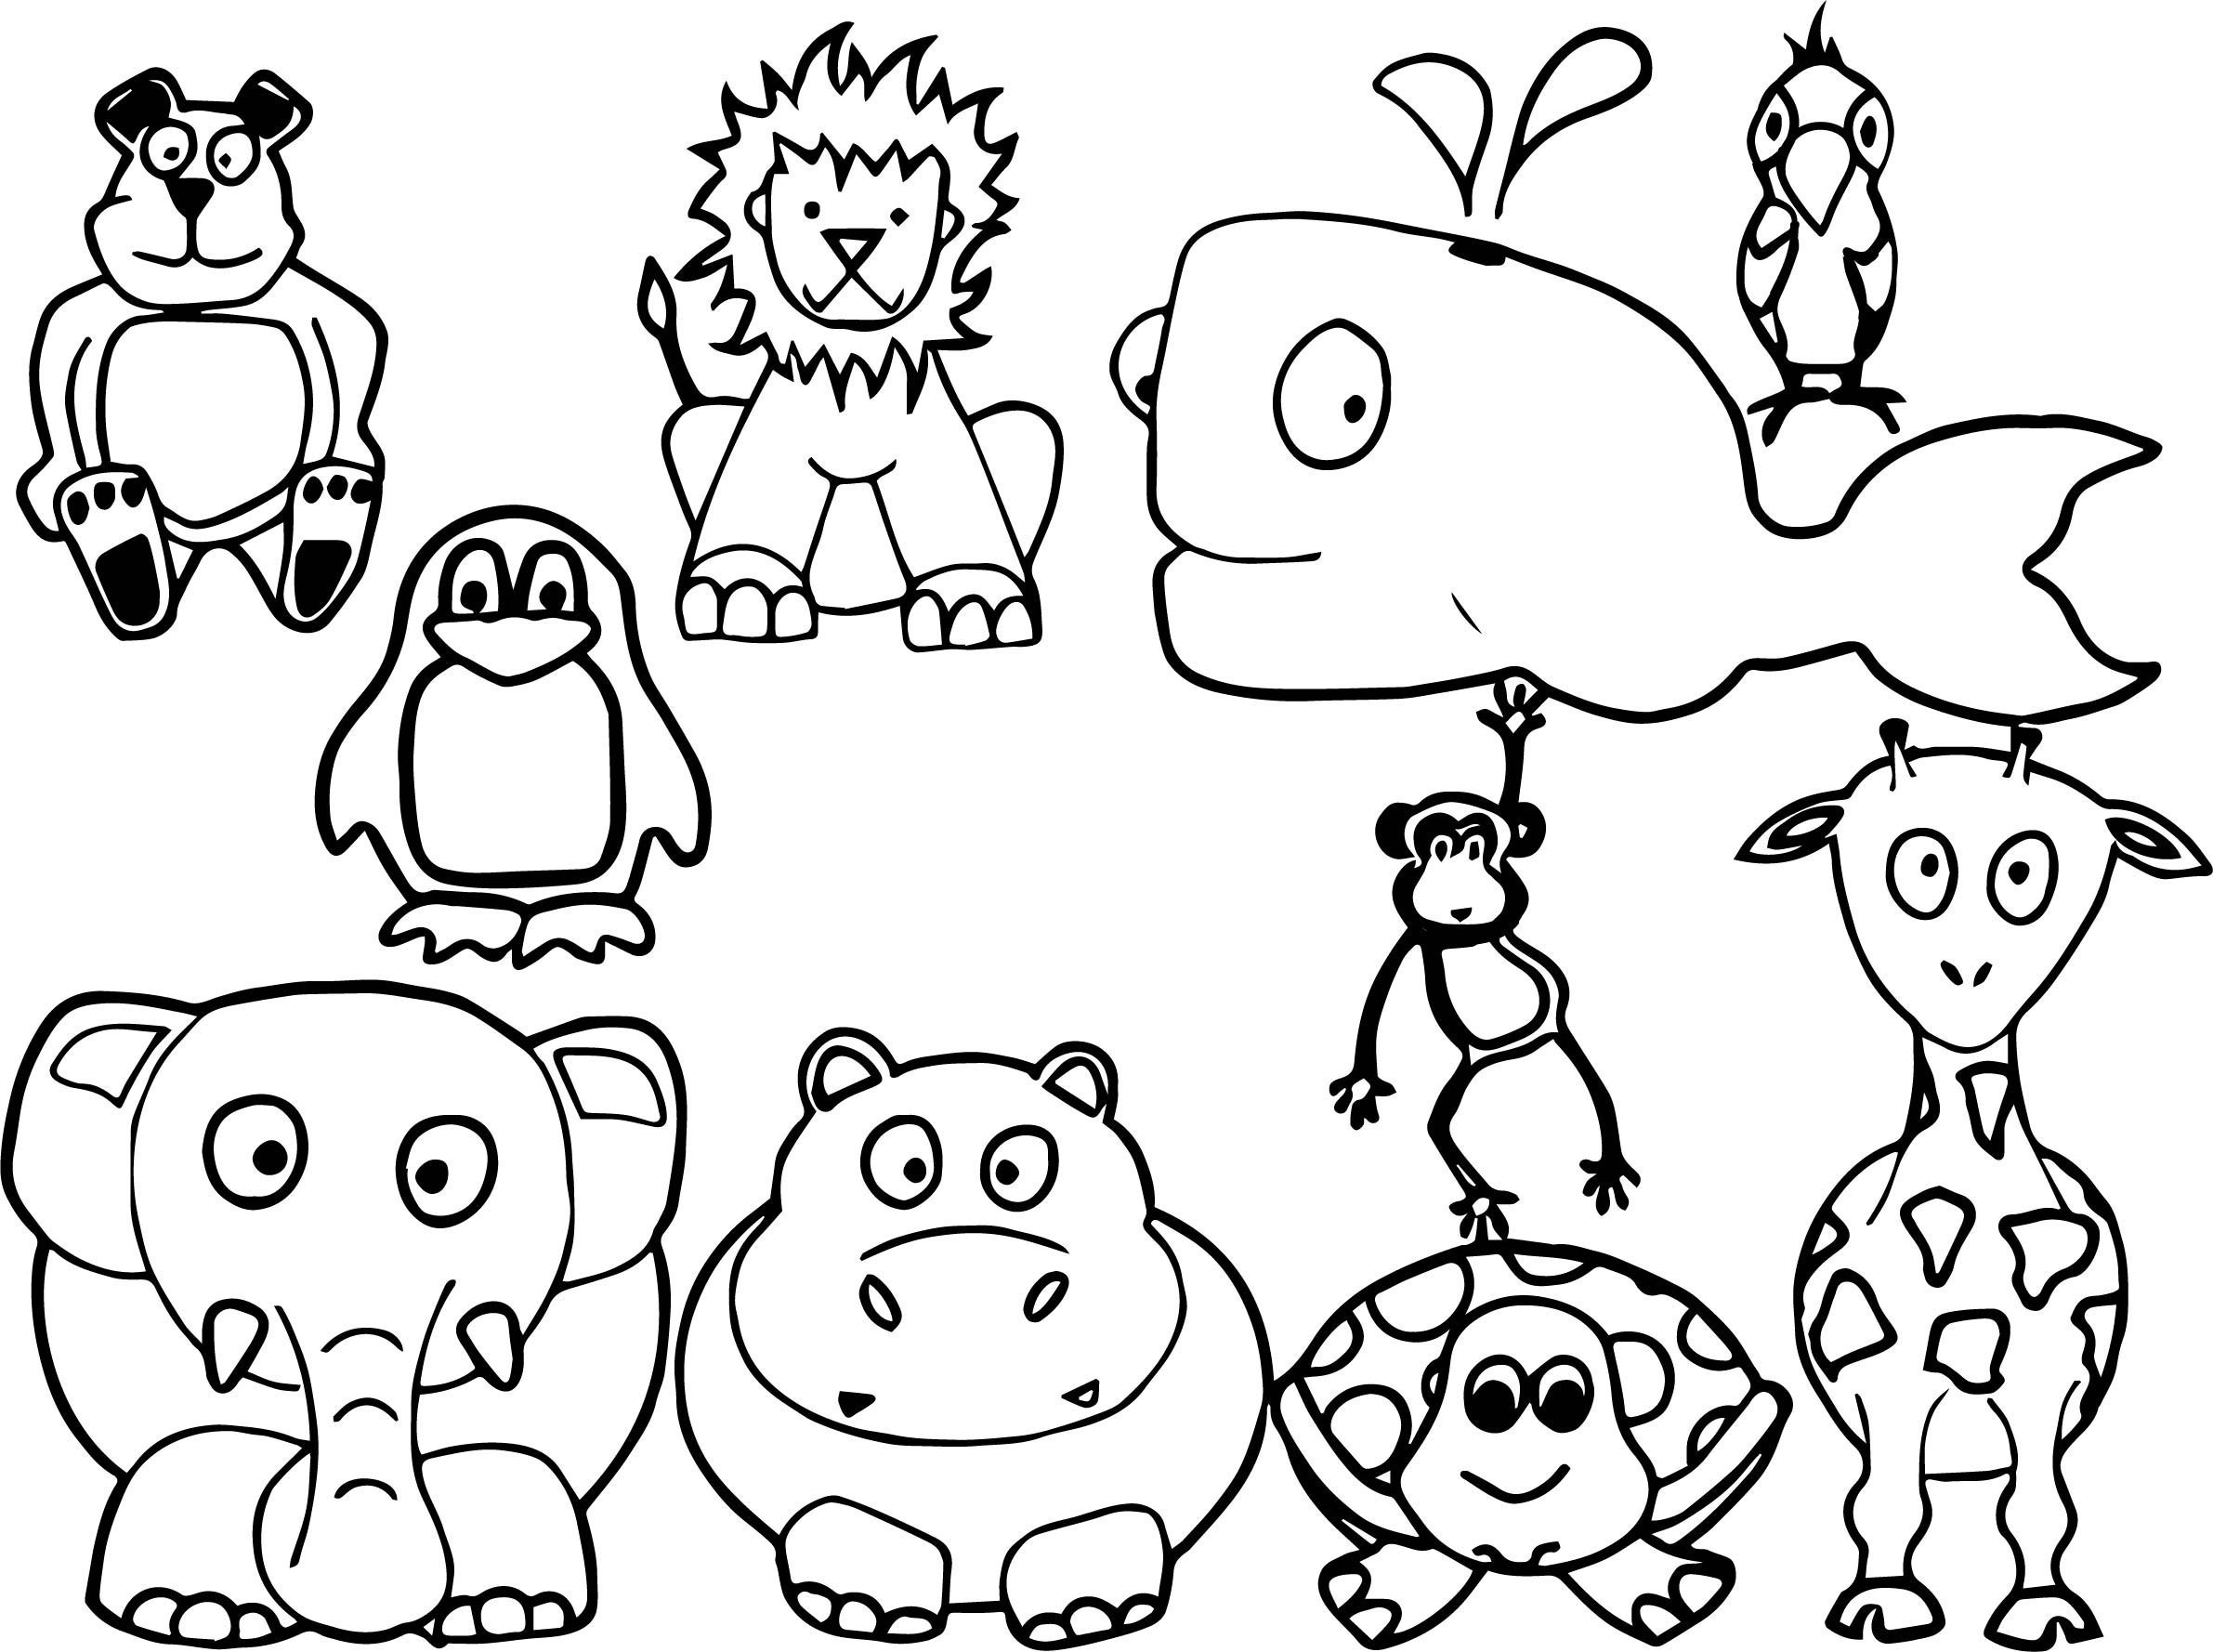 Kids Coloring Pages Animals
 Animal Coloring Pages Best Coloring Pages For Kids